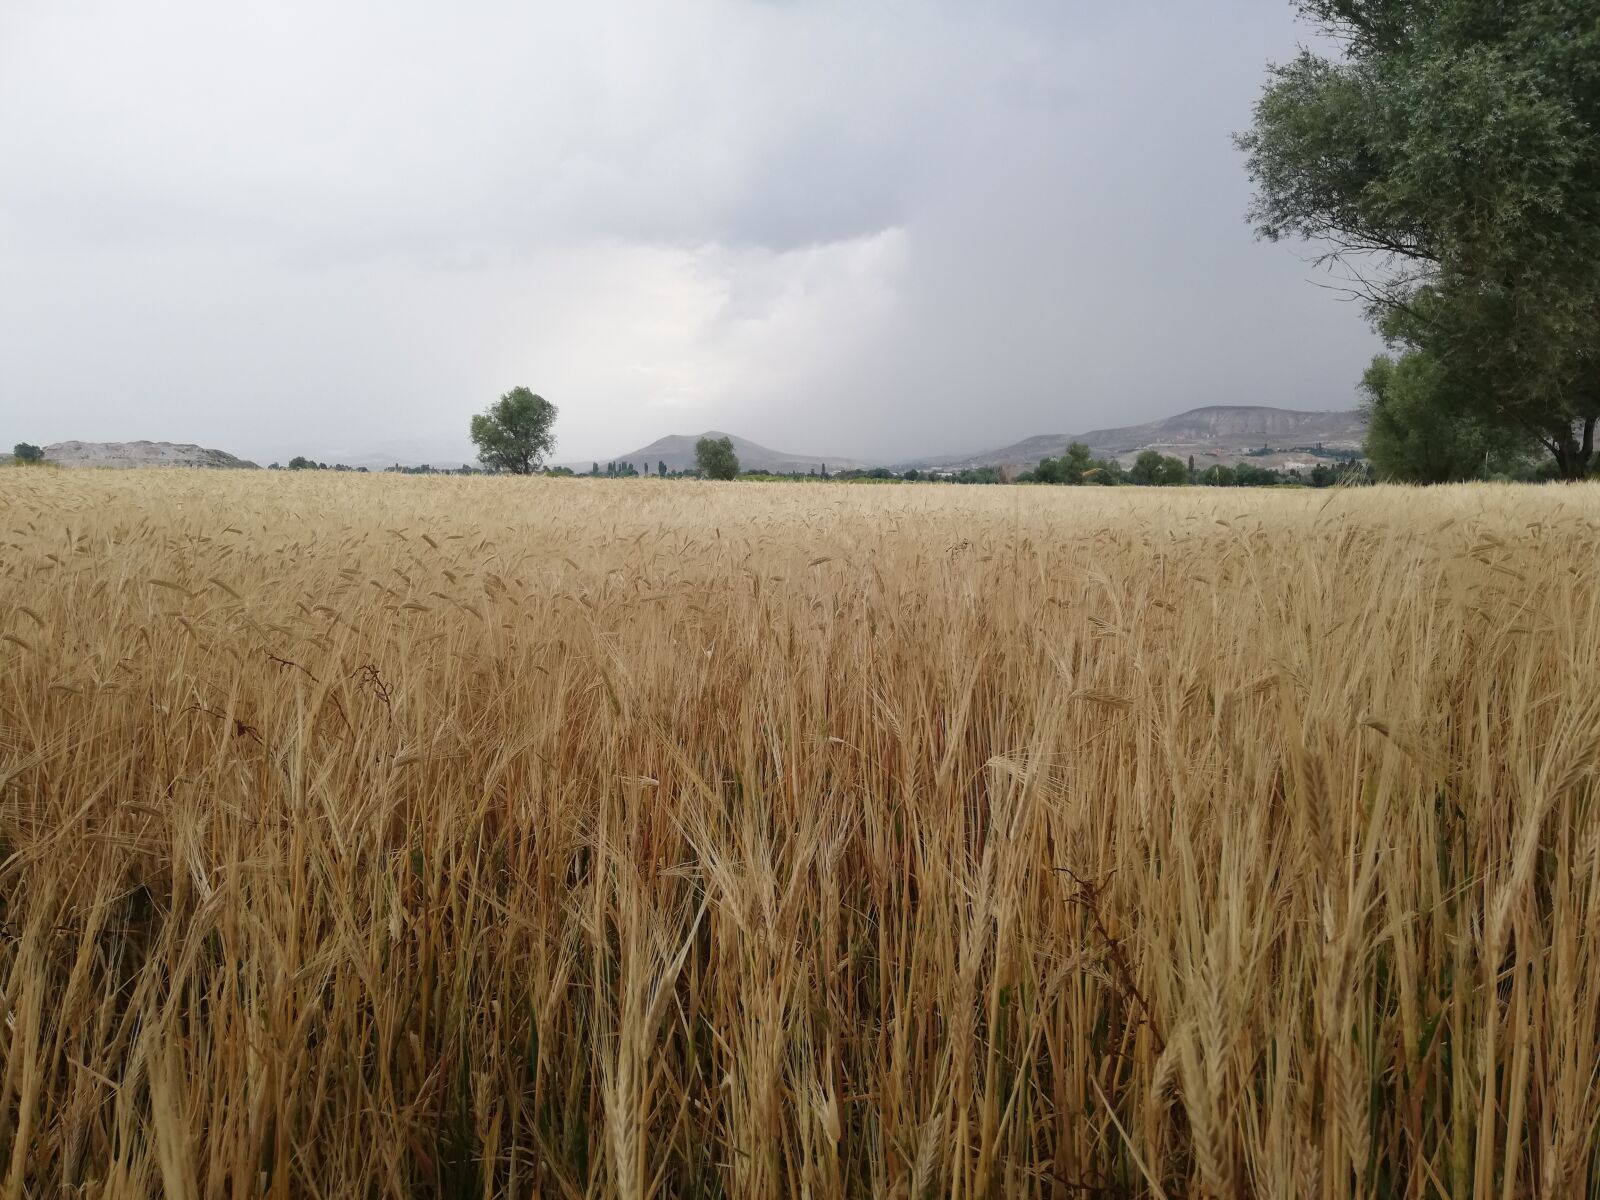 HUAWEI P20 lite sample photo. Field, barley, agriculture photography